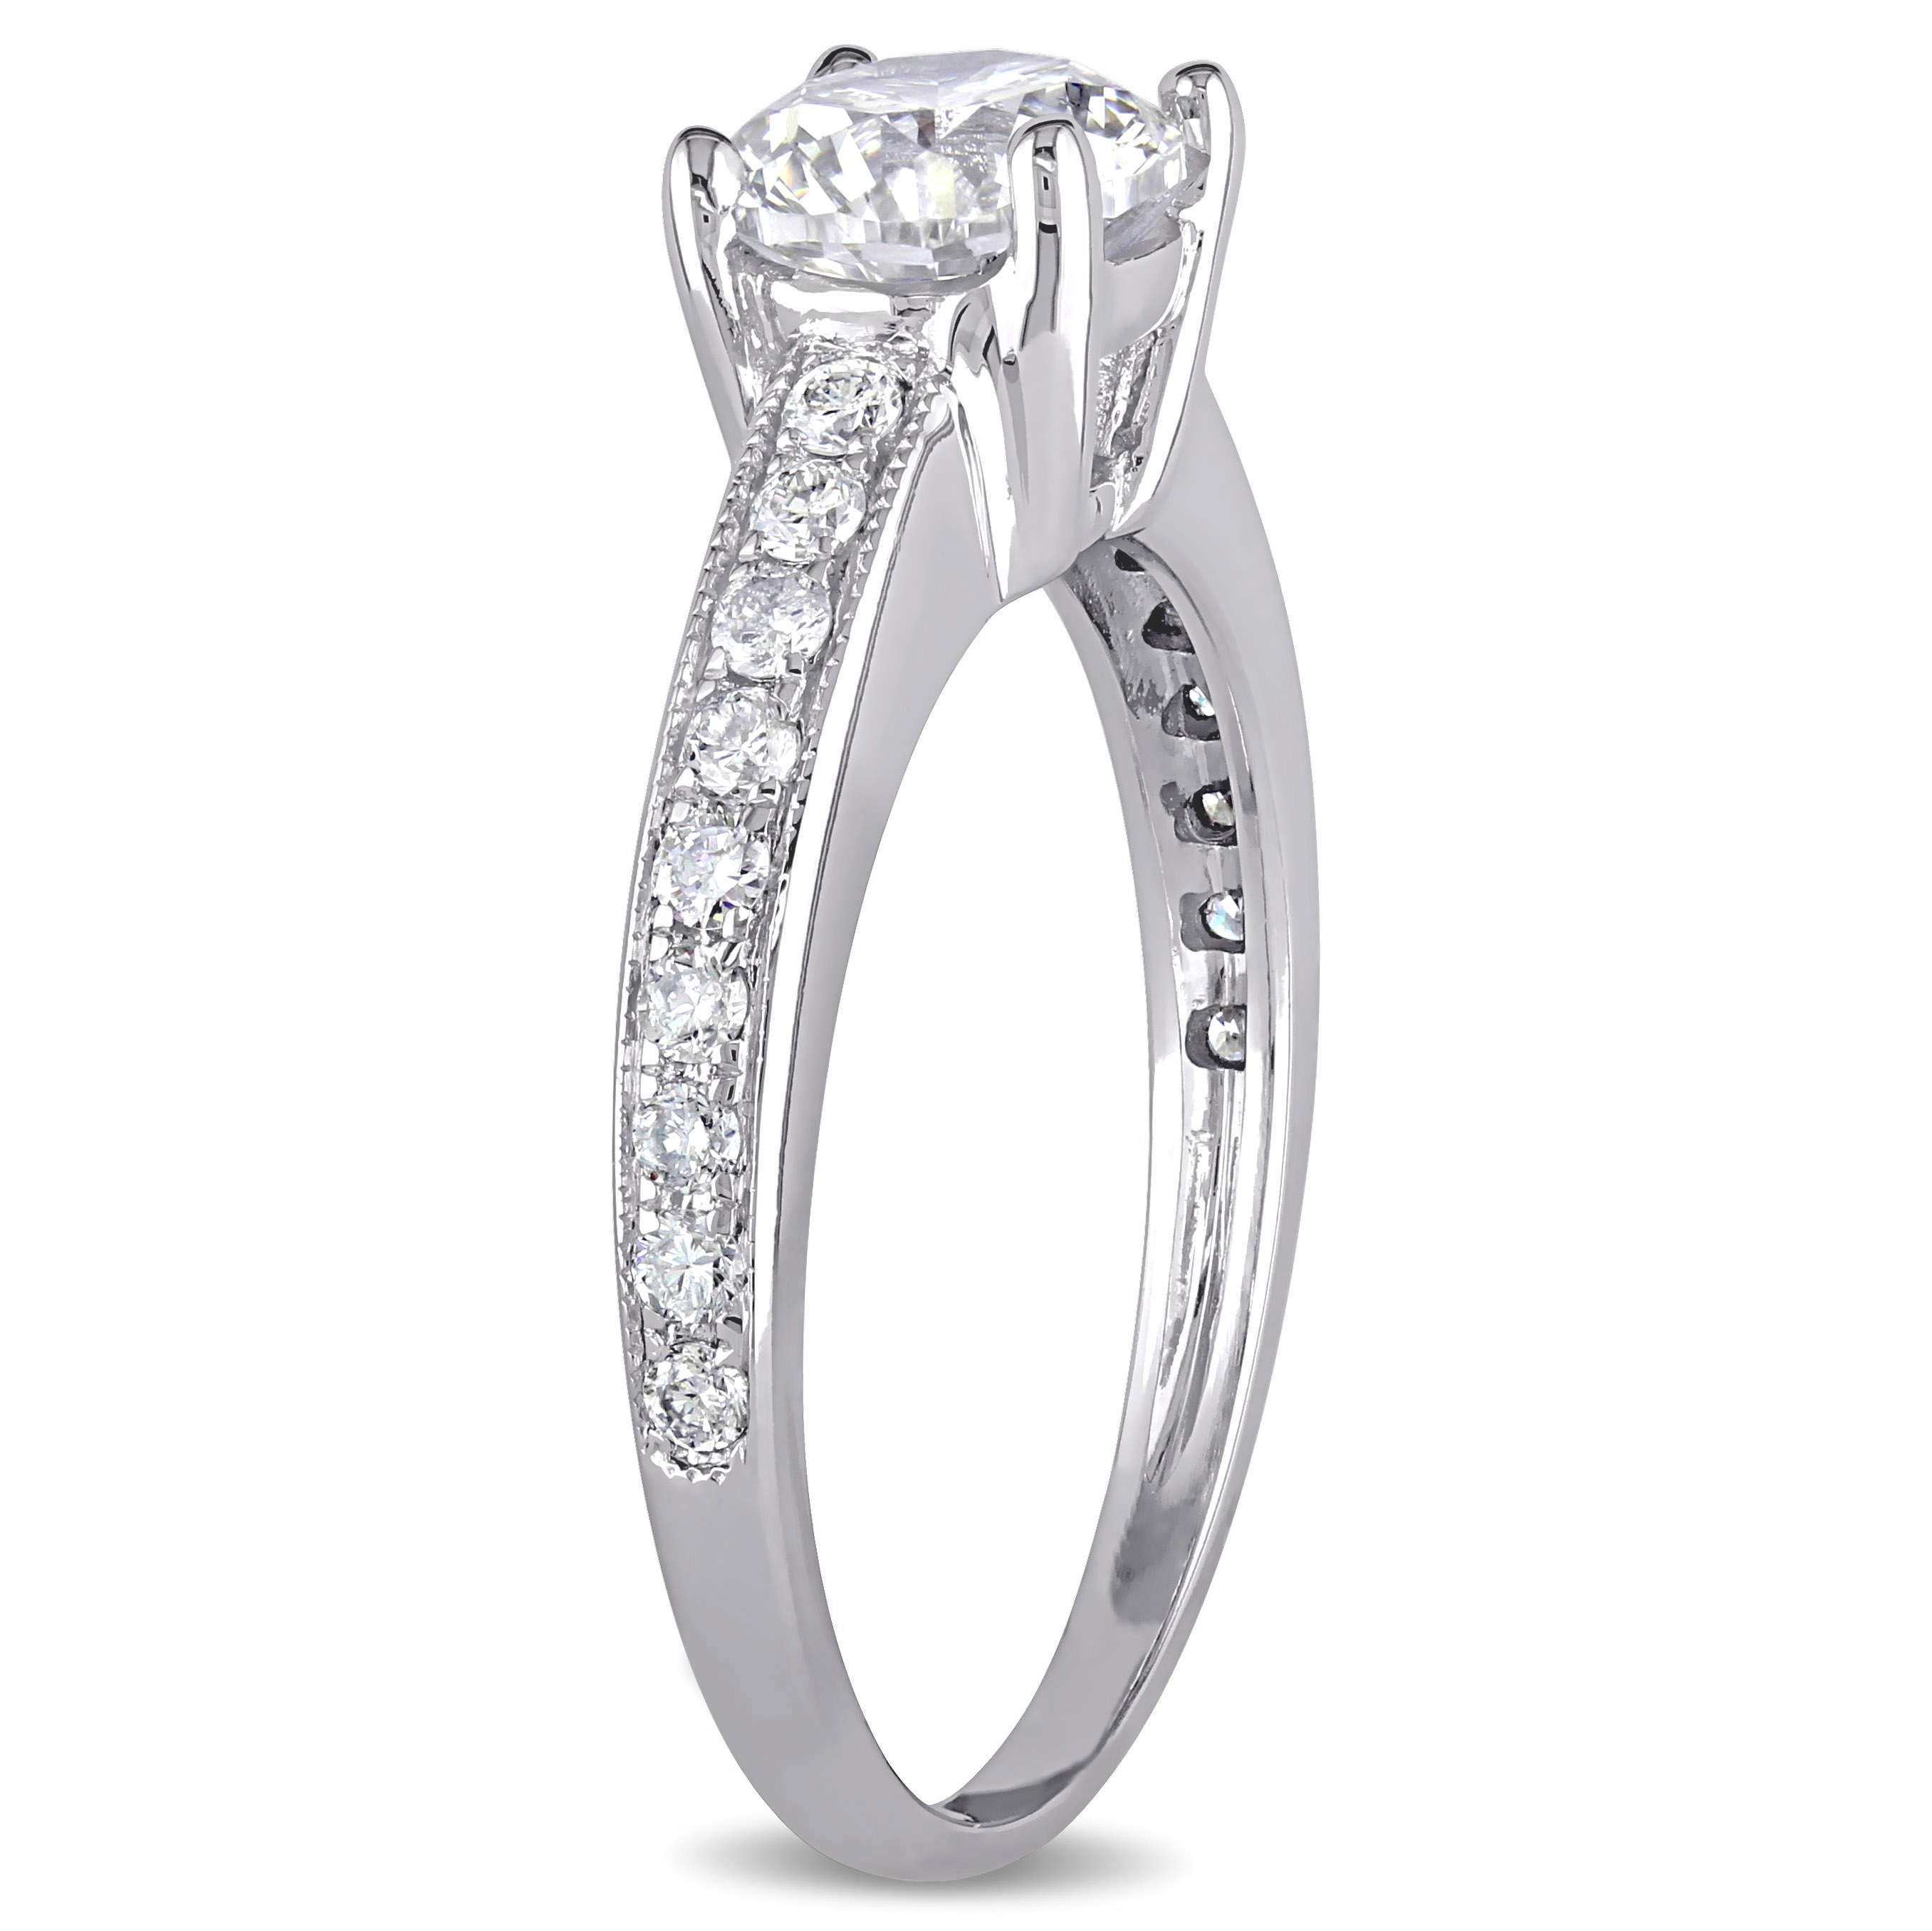 1 1/6 CT TW Diamond Engagement Ring in 18k White Gold